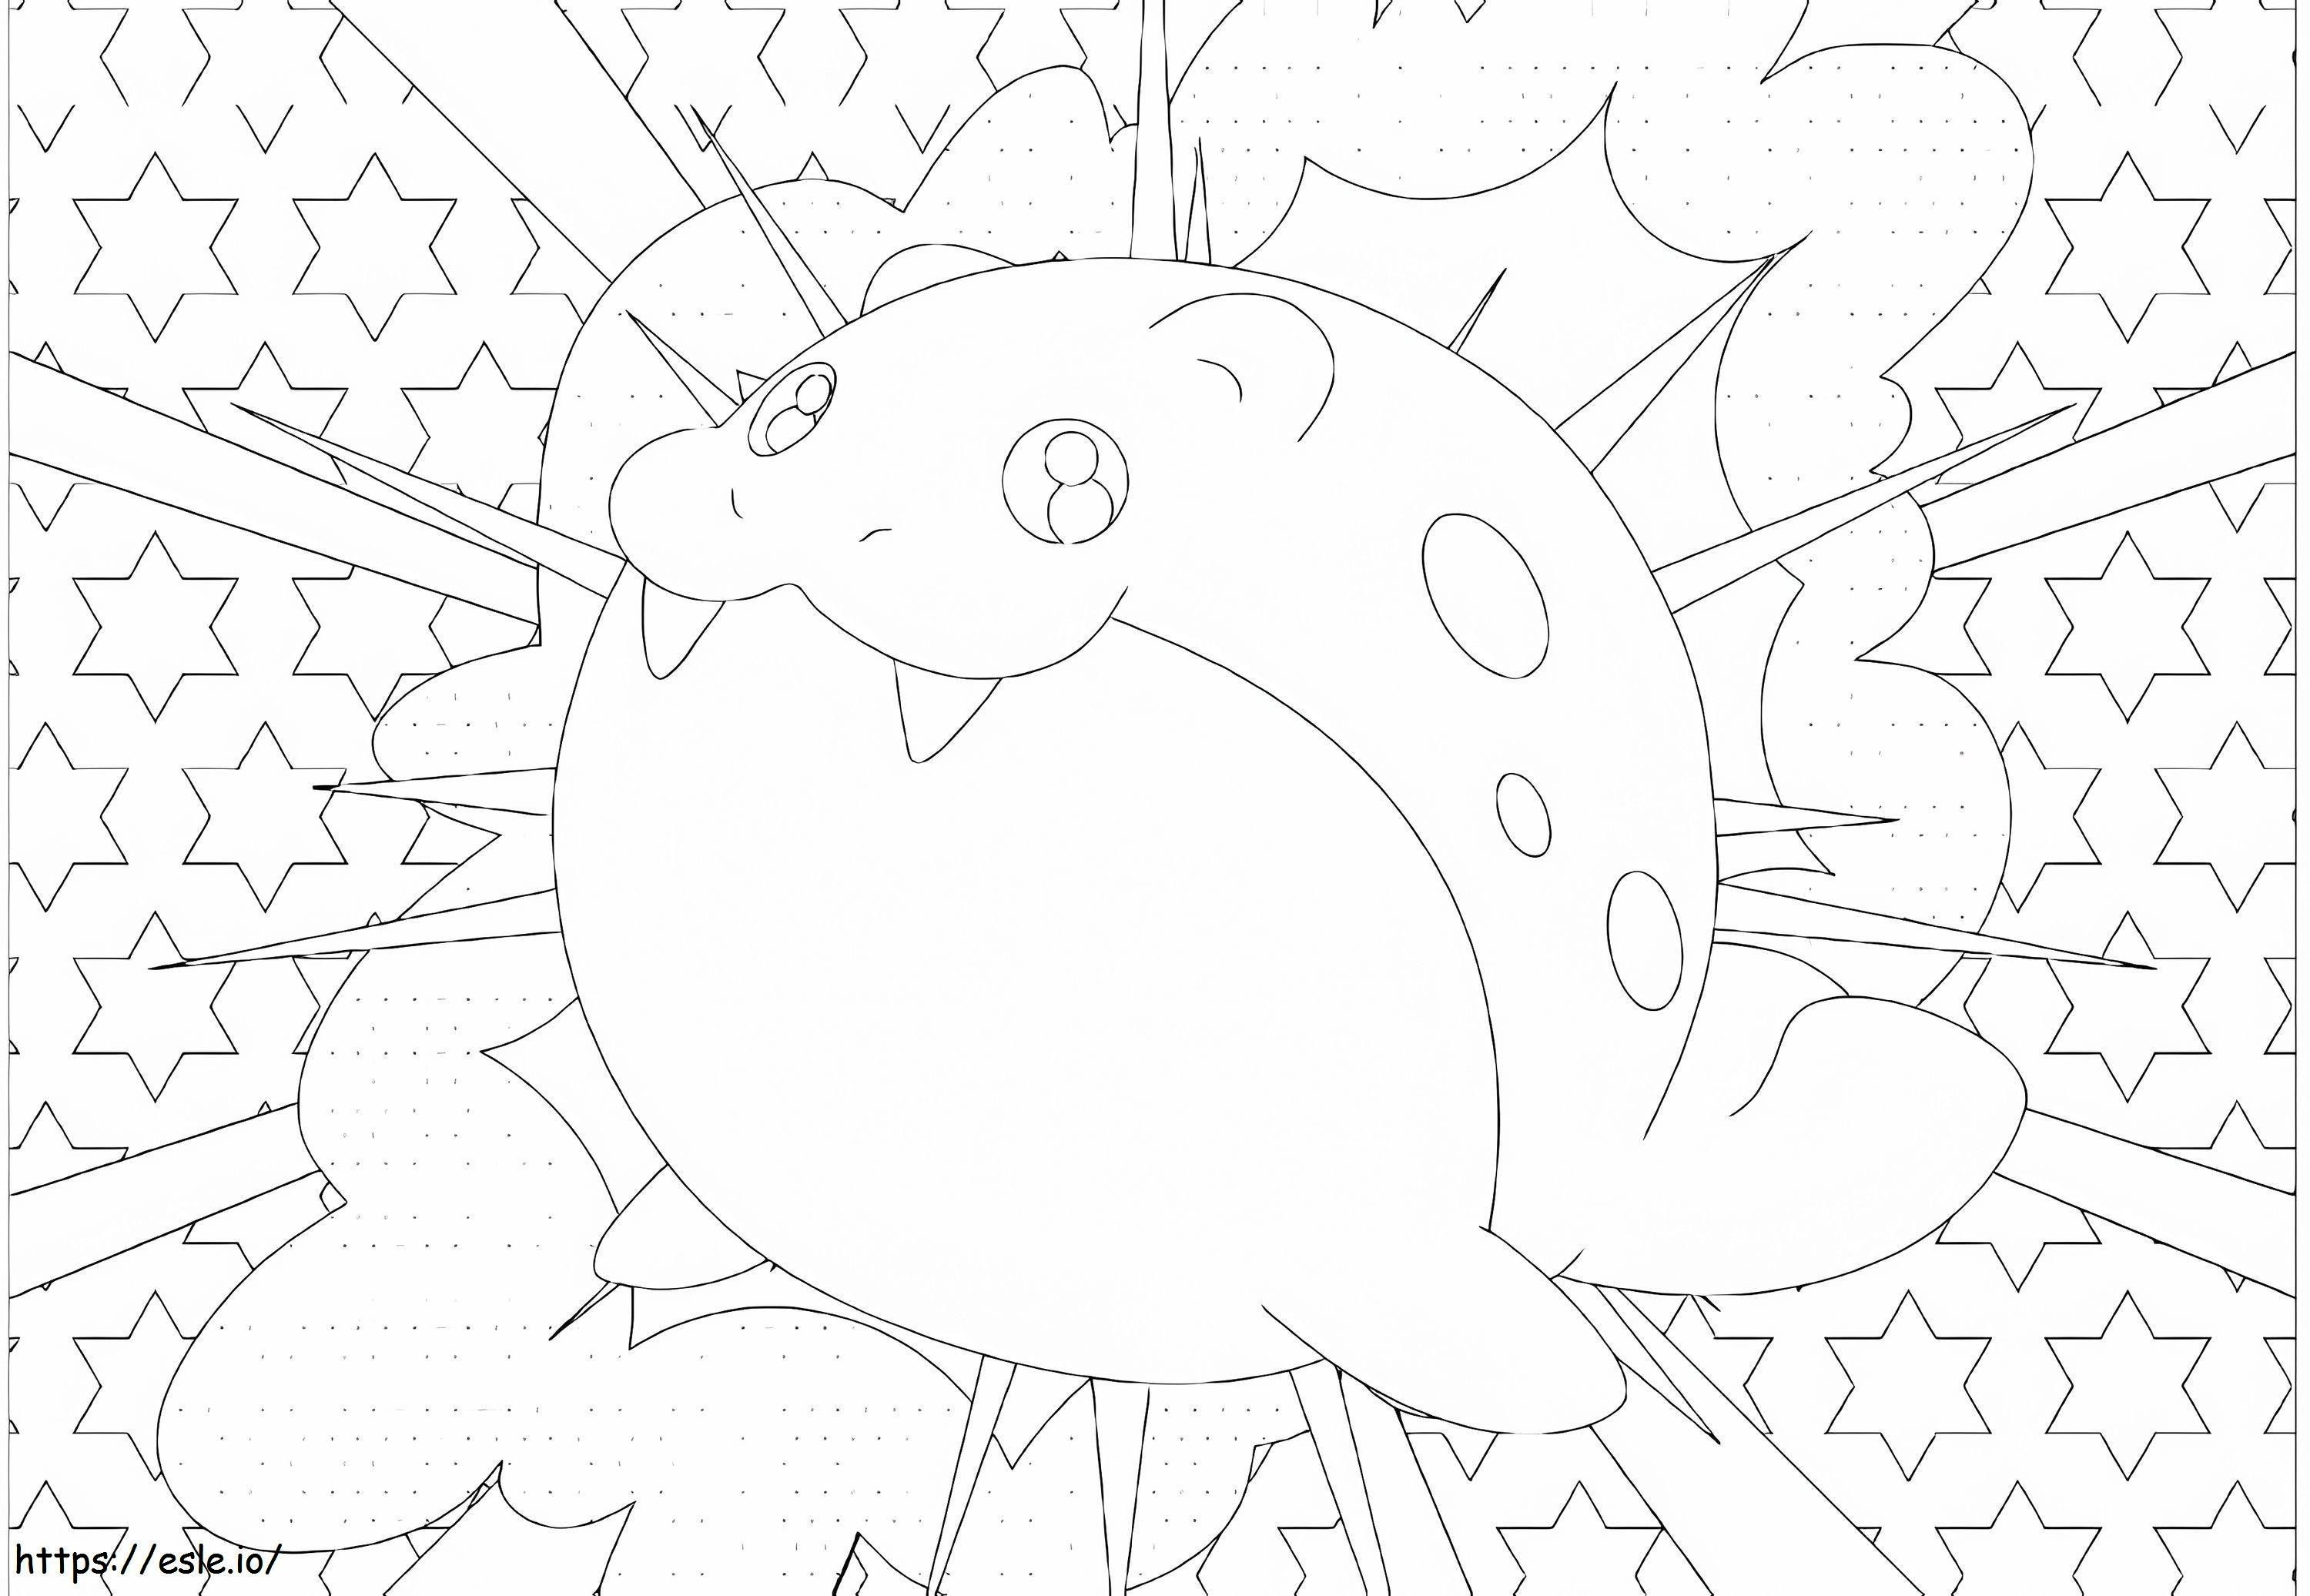 Spheal Pokemon 1 coloring page